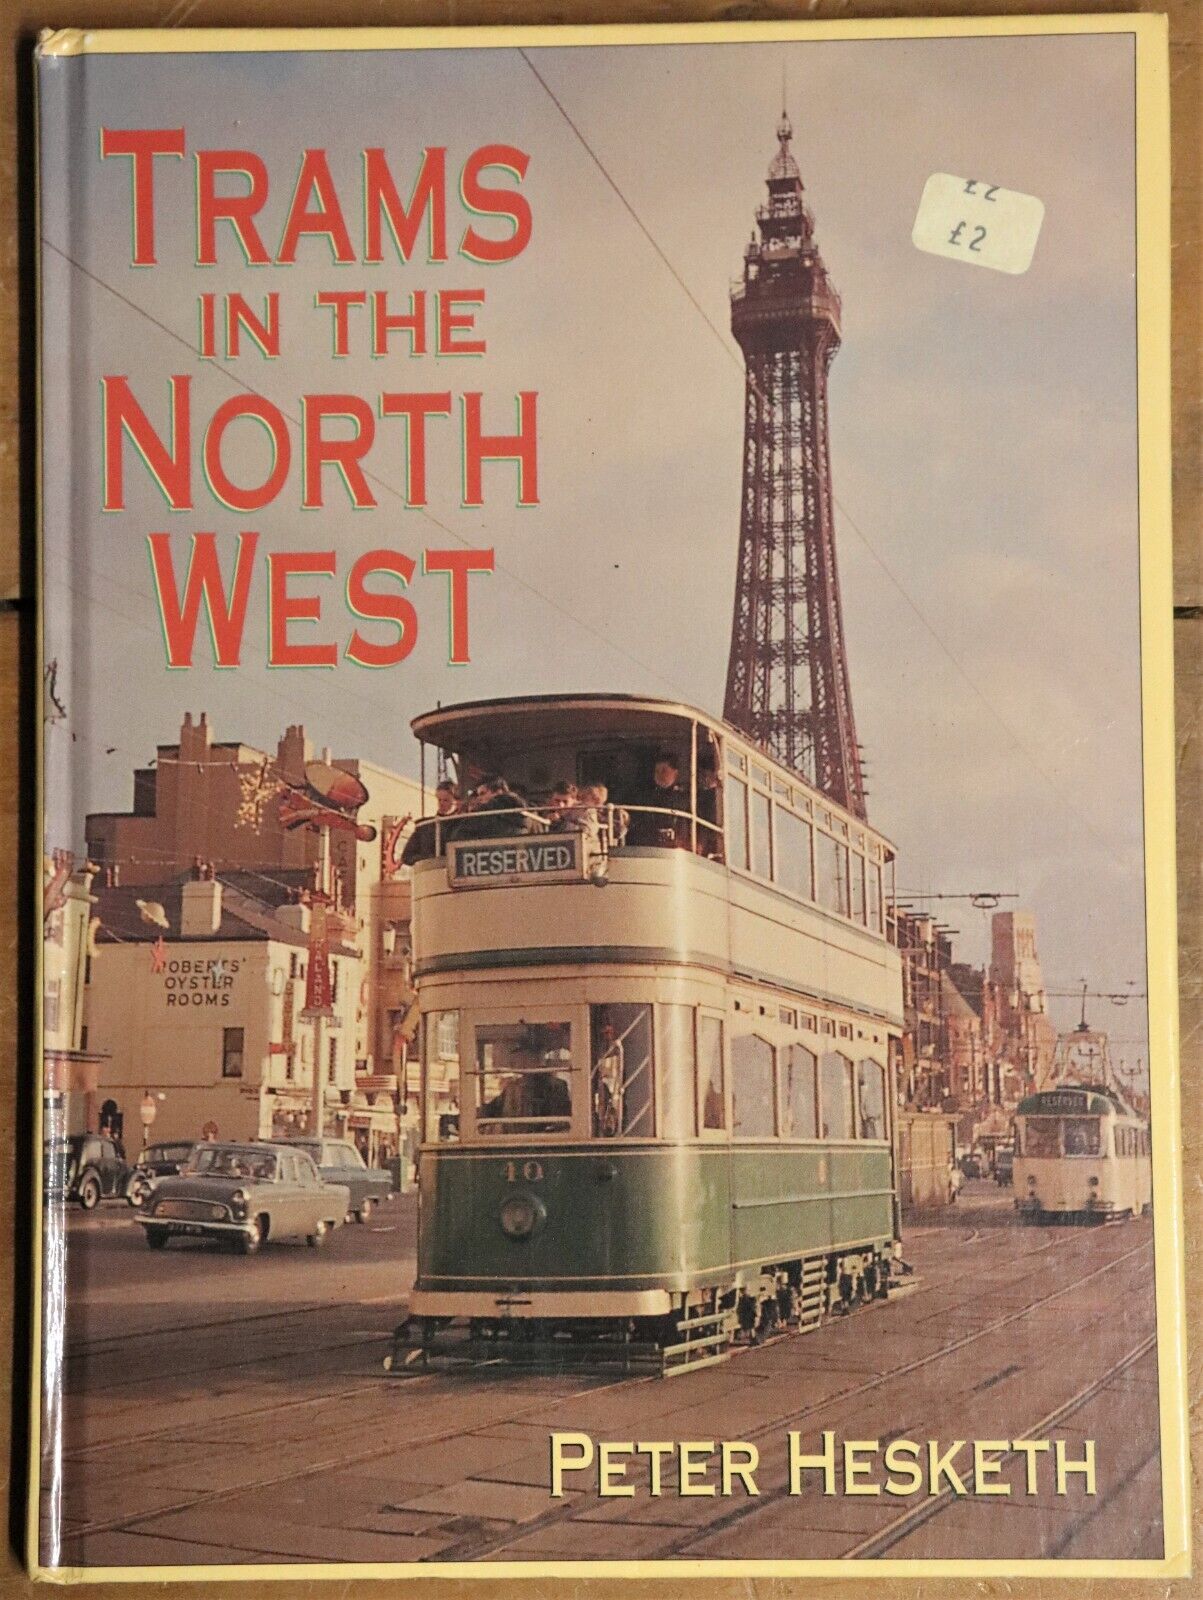 Trams In The Northwest - 1995 - 1st Edition - British Rail History